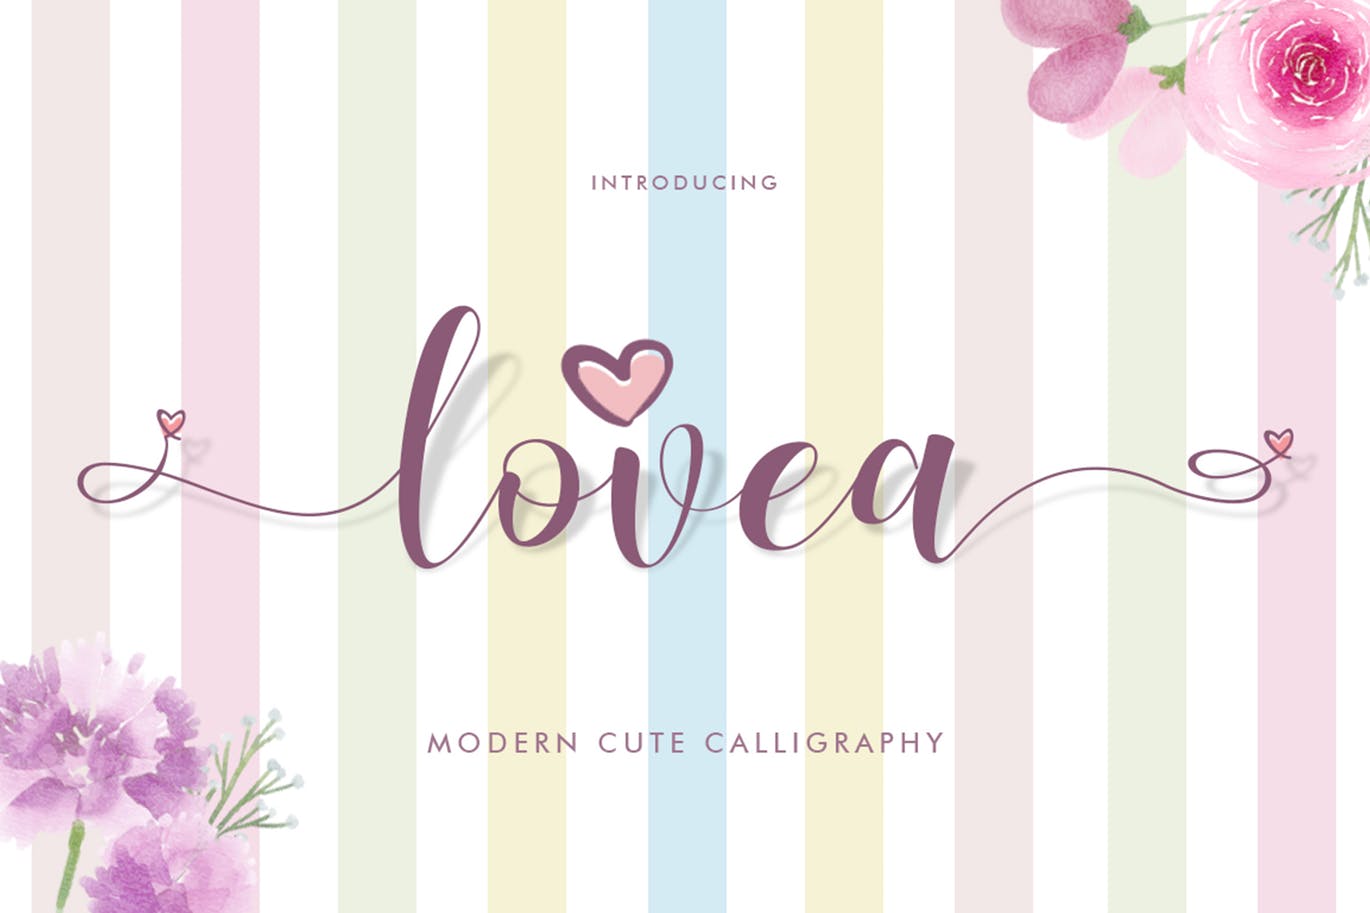 A modern and cute calligraphy font